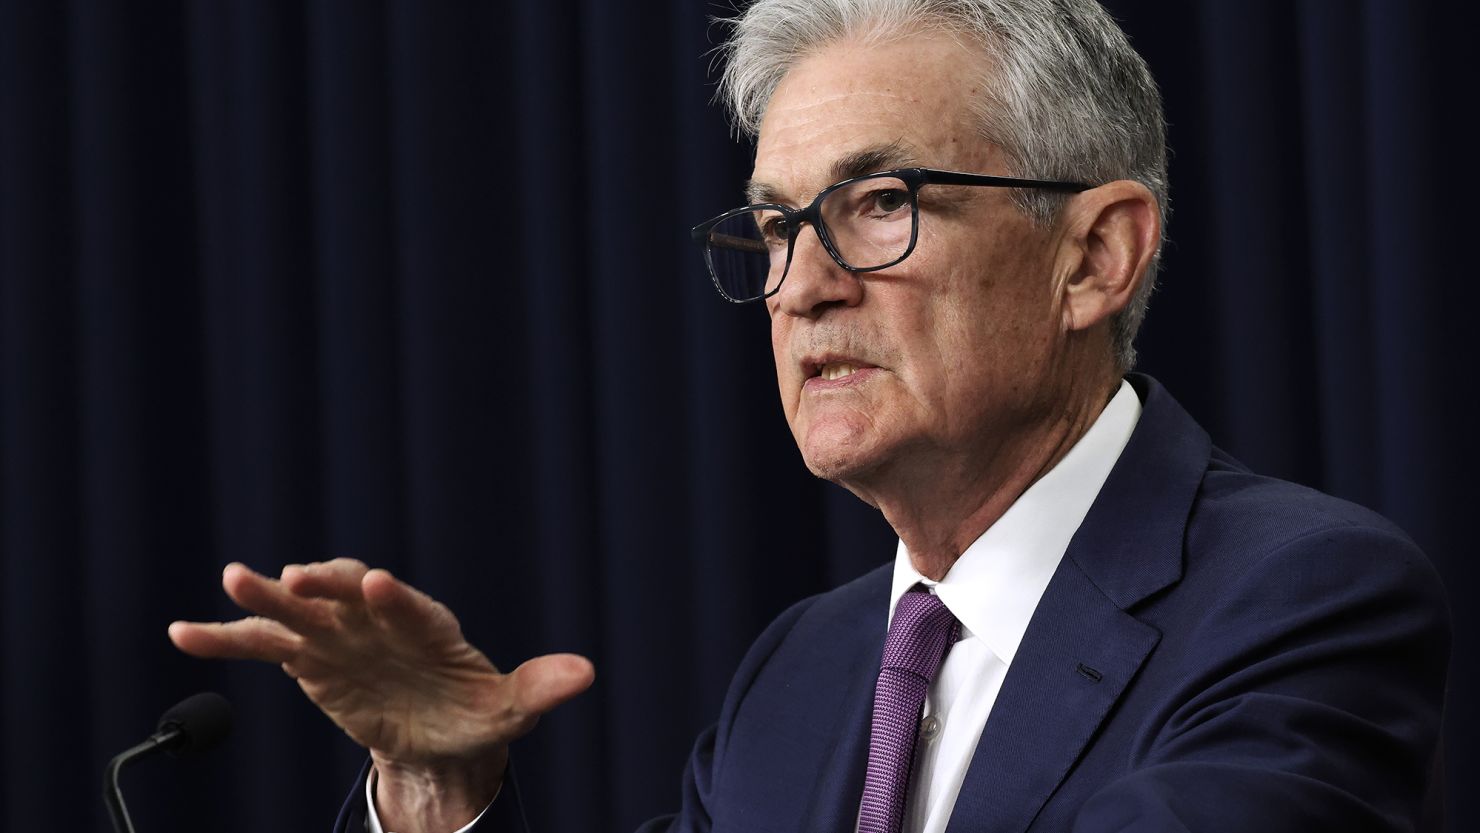 Federal Reserve Bank Chair Jerome Powell during a news conference on May 1 in Washington, DC.